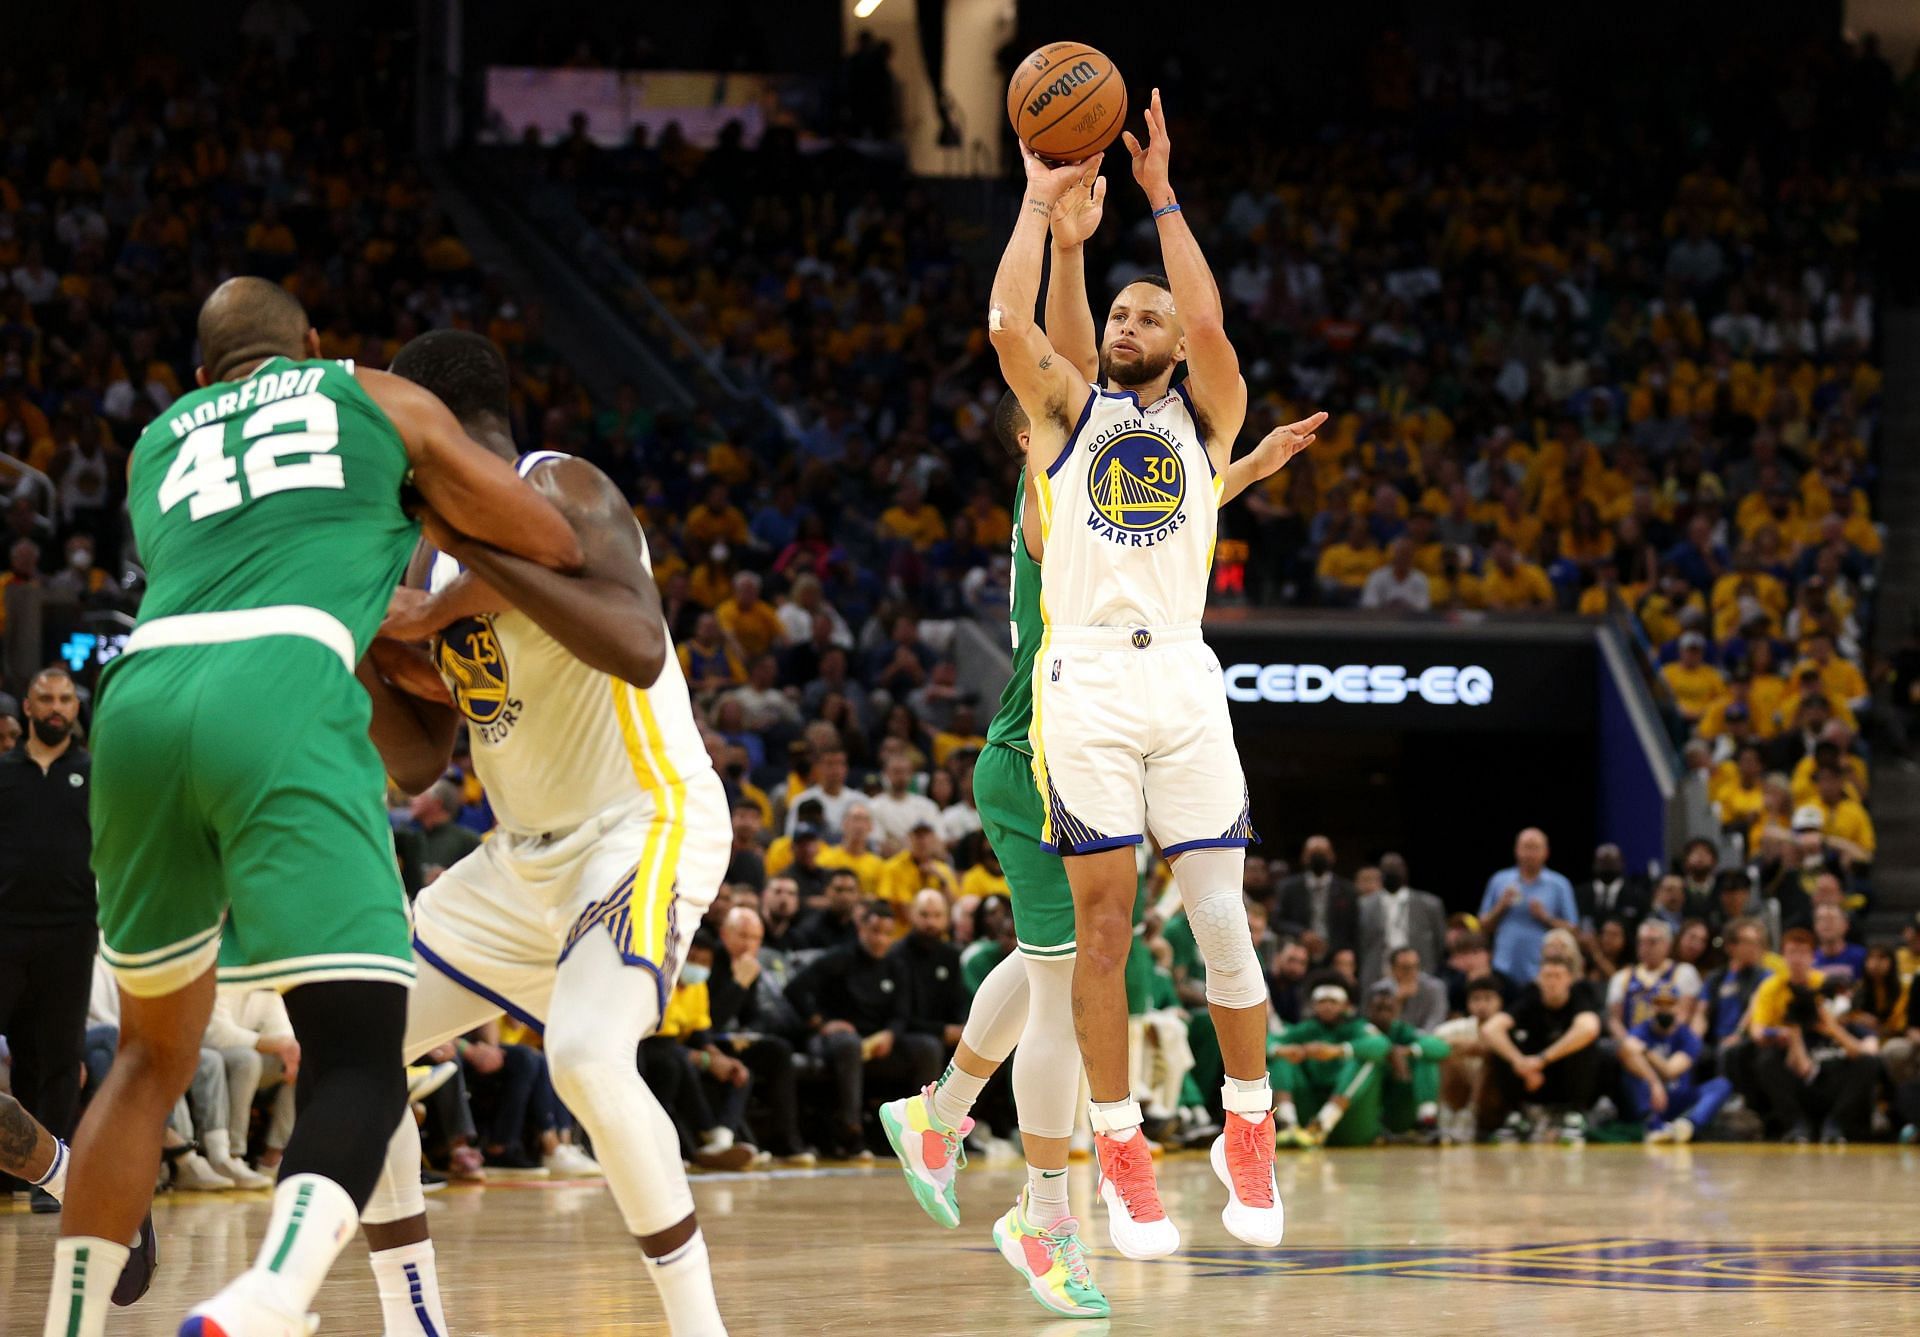 The entire offense of the Golden State Warriors revolves around Stephen Curry, as rightly pointed out by Draymond Green in the post-game press-conference.